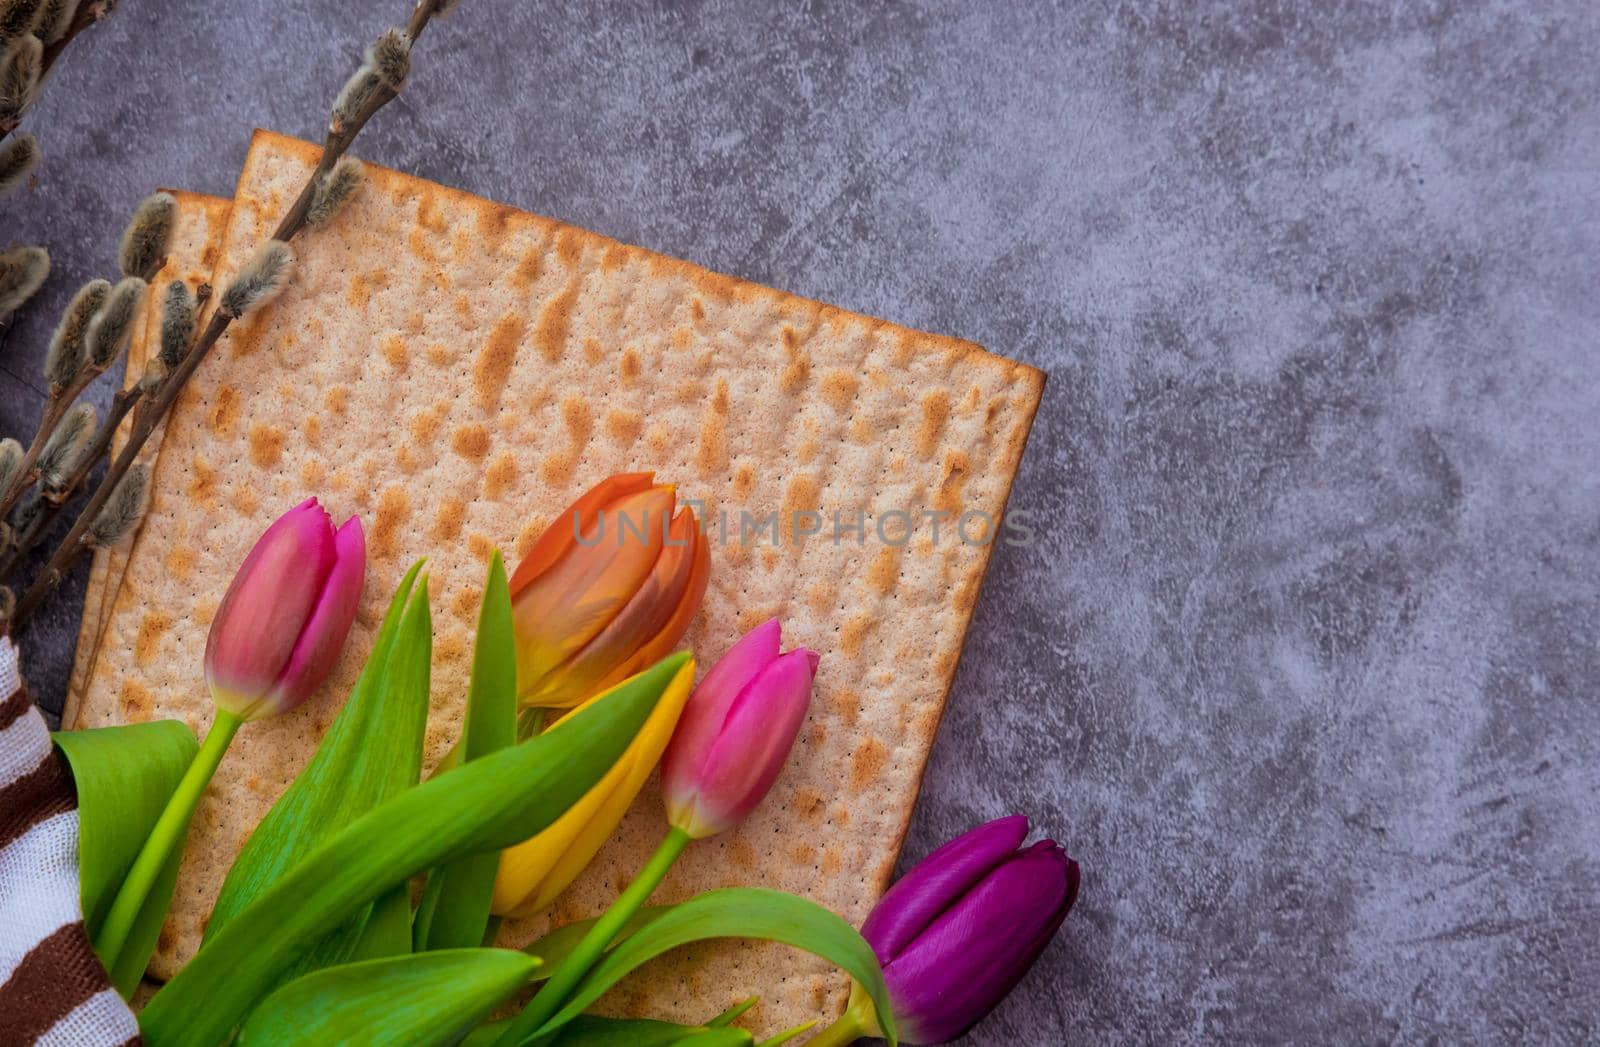 Jewish holiday of traditional Passover kosher matzah bread for the ceremony ritual blessings on Pesach celebration